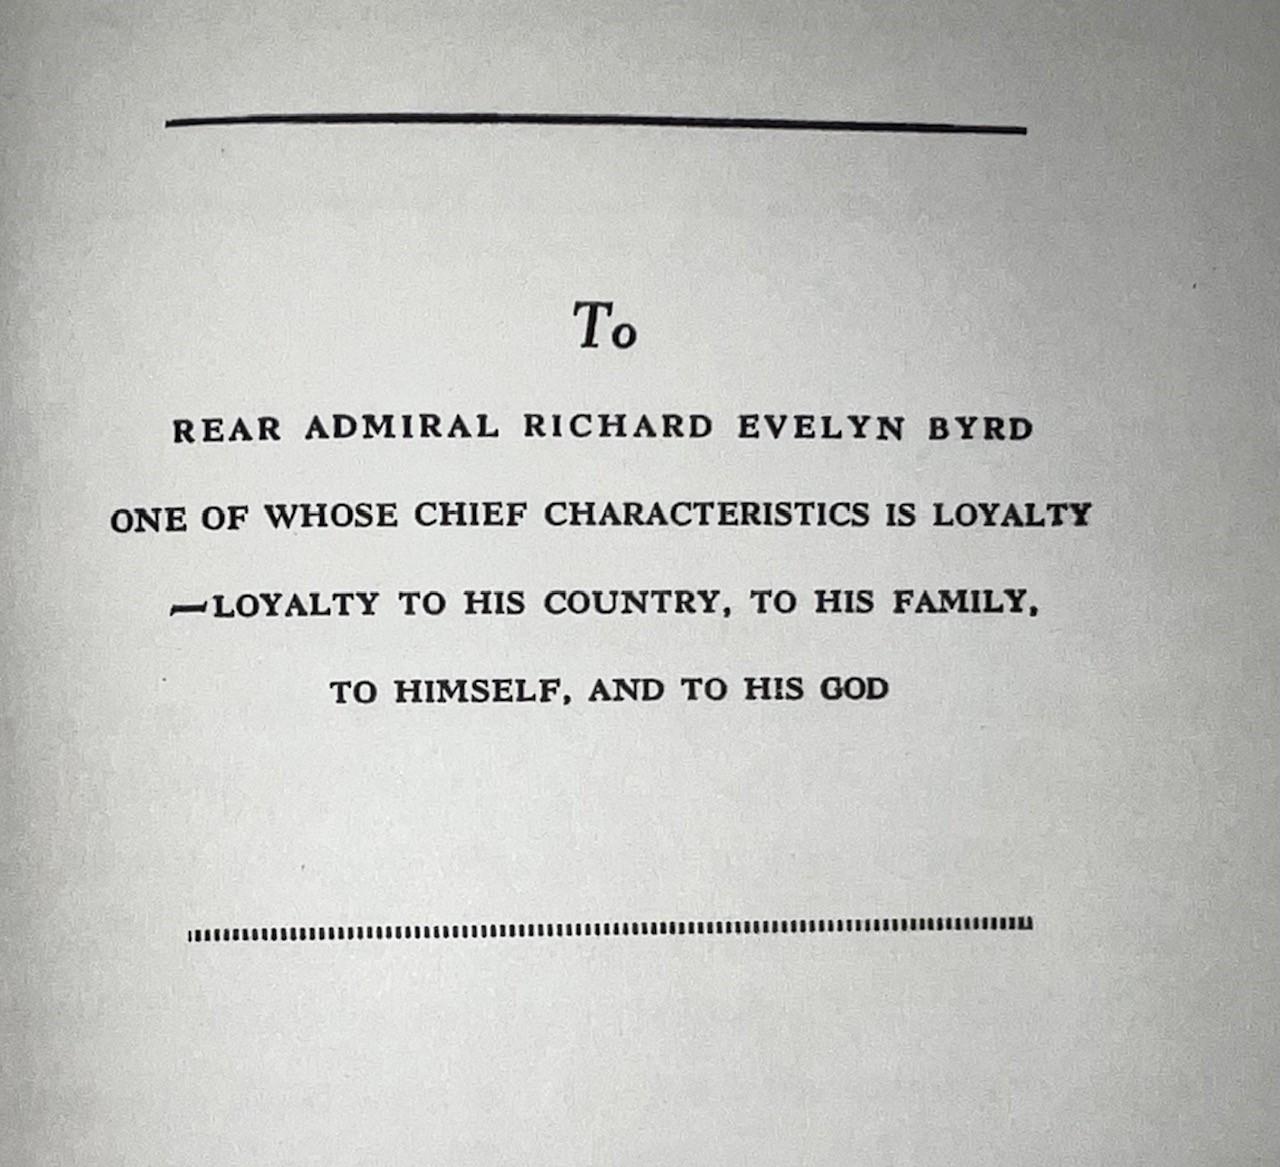 Book dedication page: To Rear Admiral Richard Evelyn Byrd One of Whose Chief Characteristics is Loyalty ~ Loyalty to his country, to his family, to himself and to his God